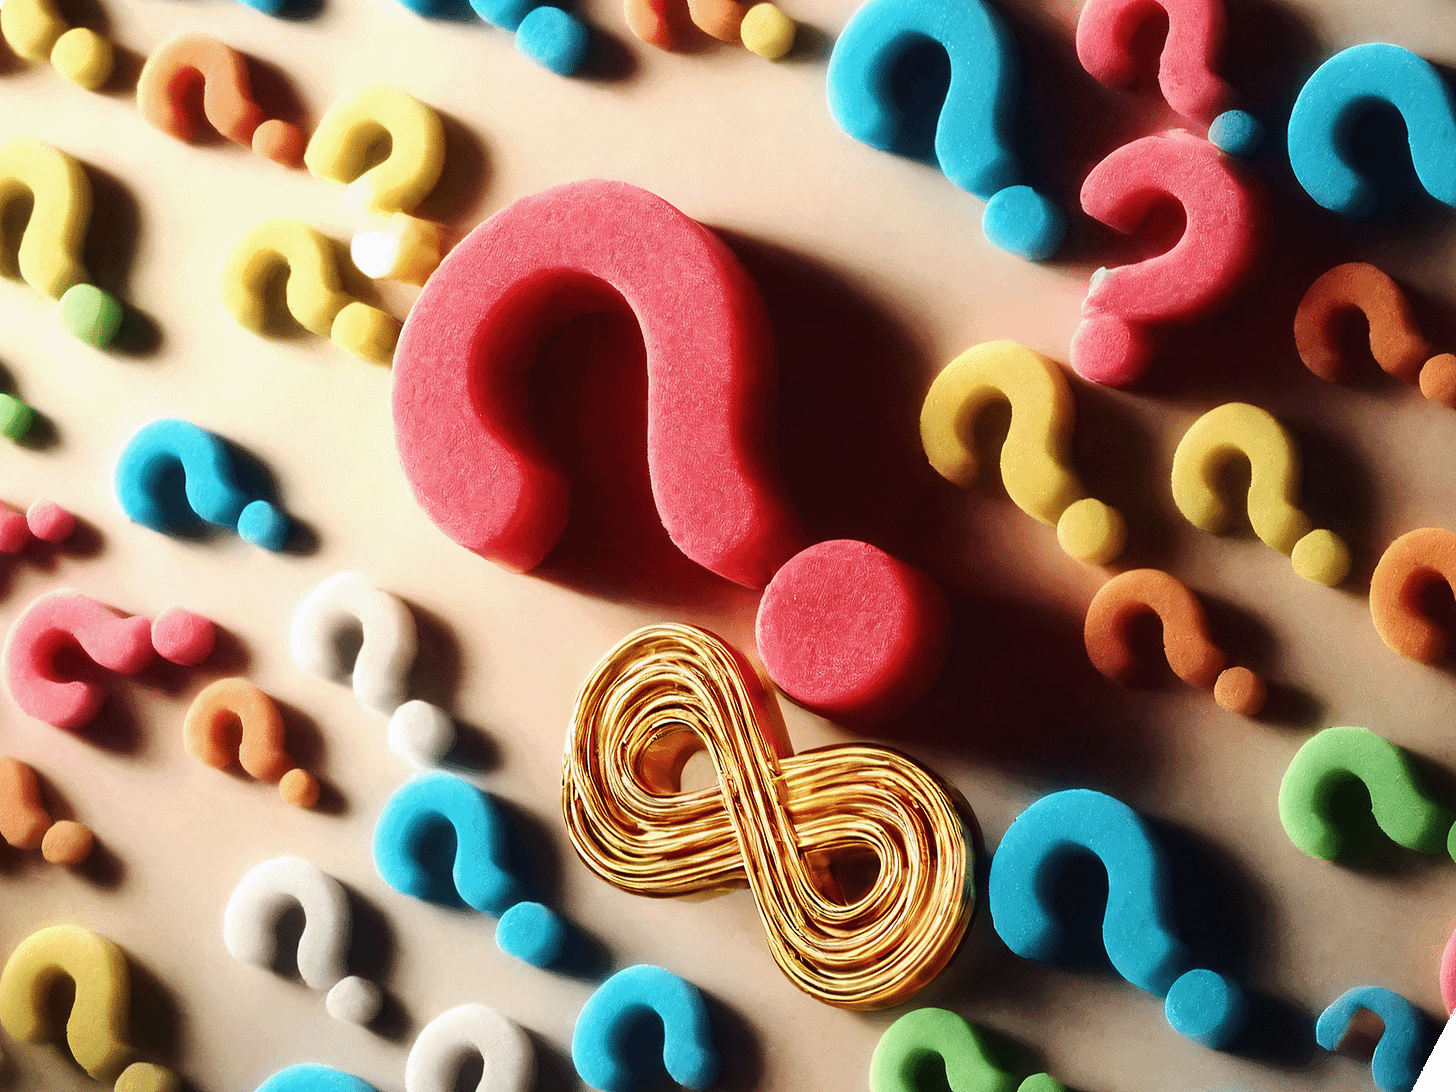 A digital photo illustration by the author, "Fiercely Autistic Questions." A scattering of kid's foam question marks on tan construction paper, with a gold infinity symbol toward the center. Dramatically lit from upper left corner. Digital tools included AI.